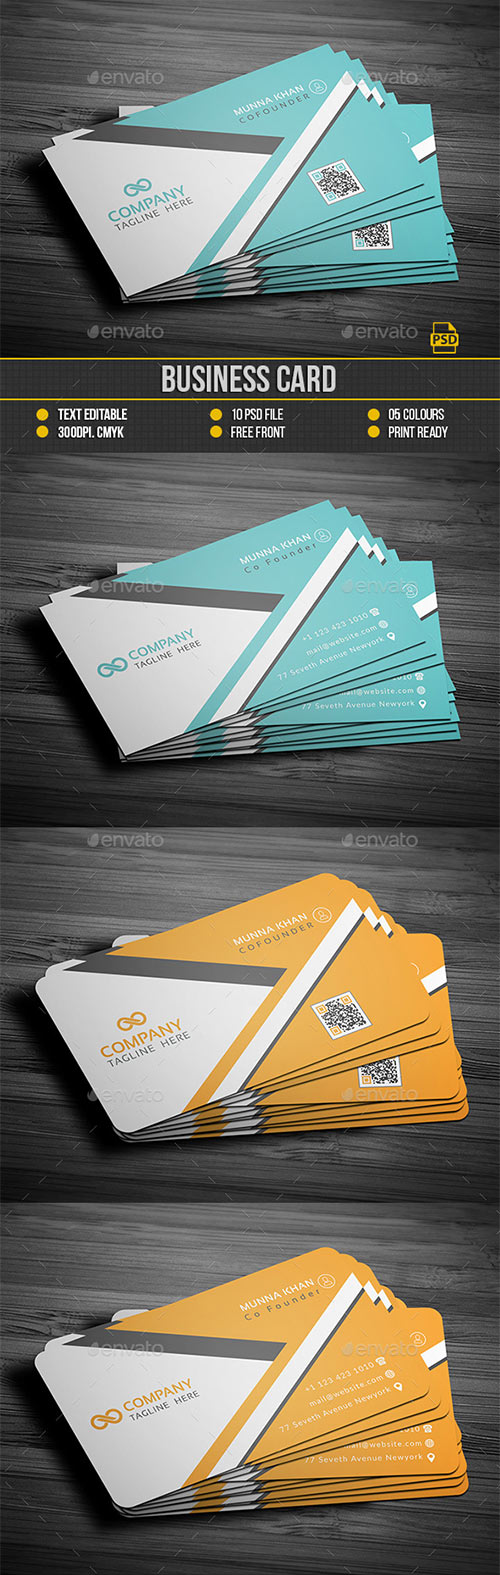 Business Card 19219852